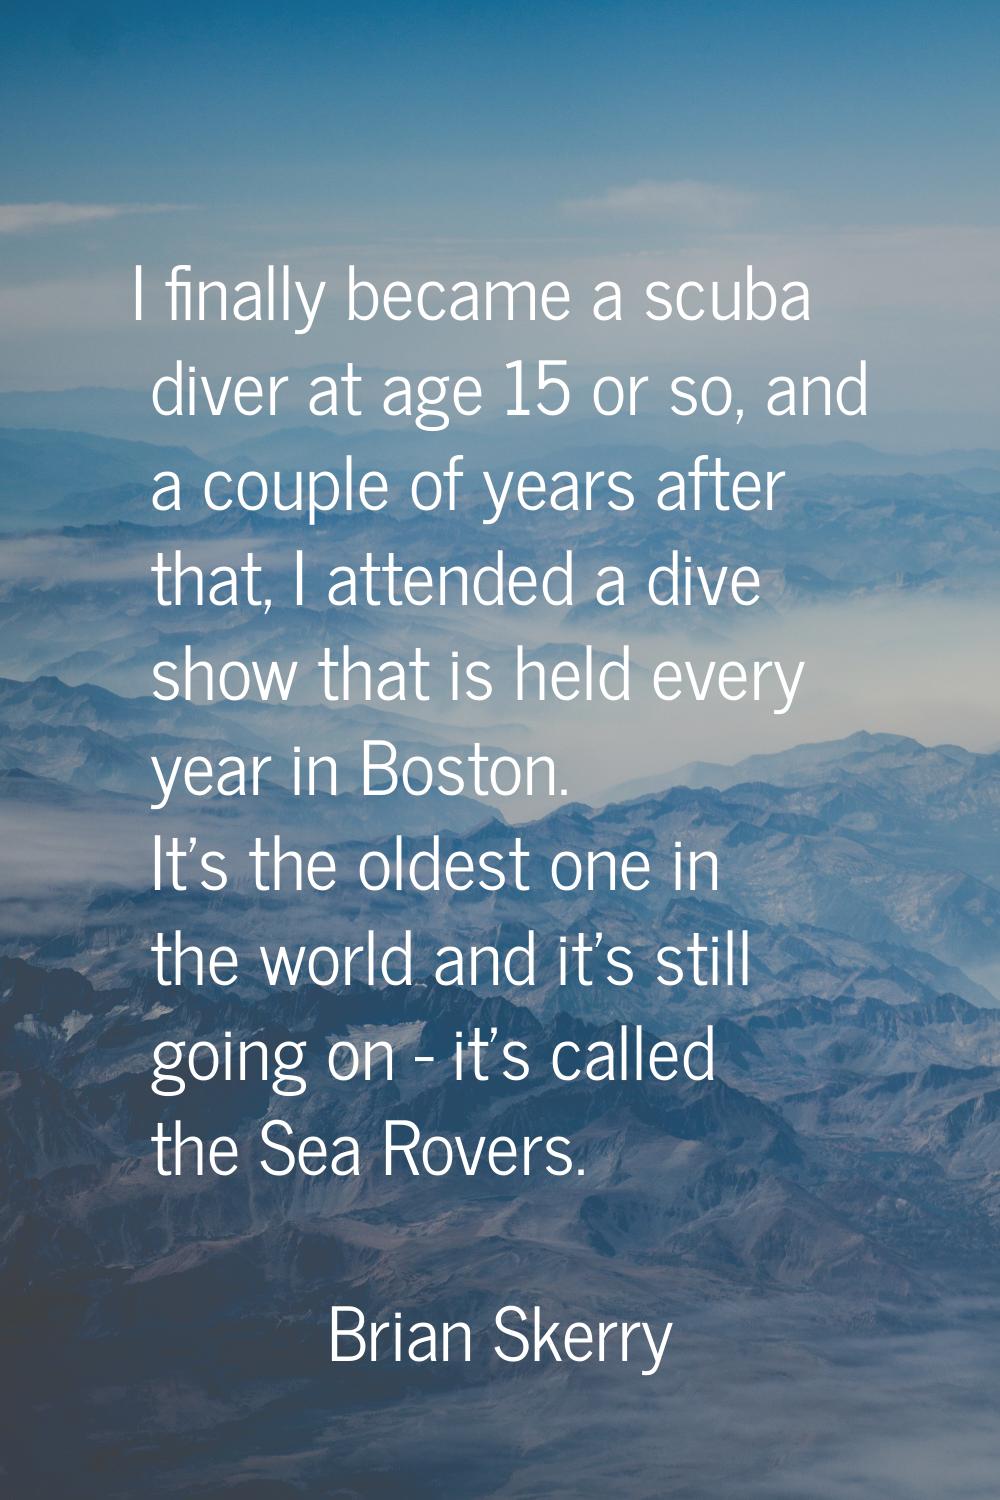 I finally became a scuba diver at age 15 or so, and a couple of years after that, I attended a dive